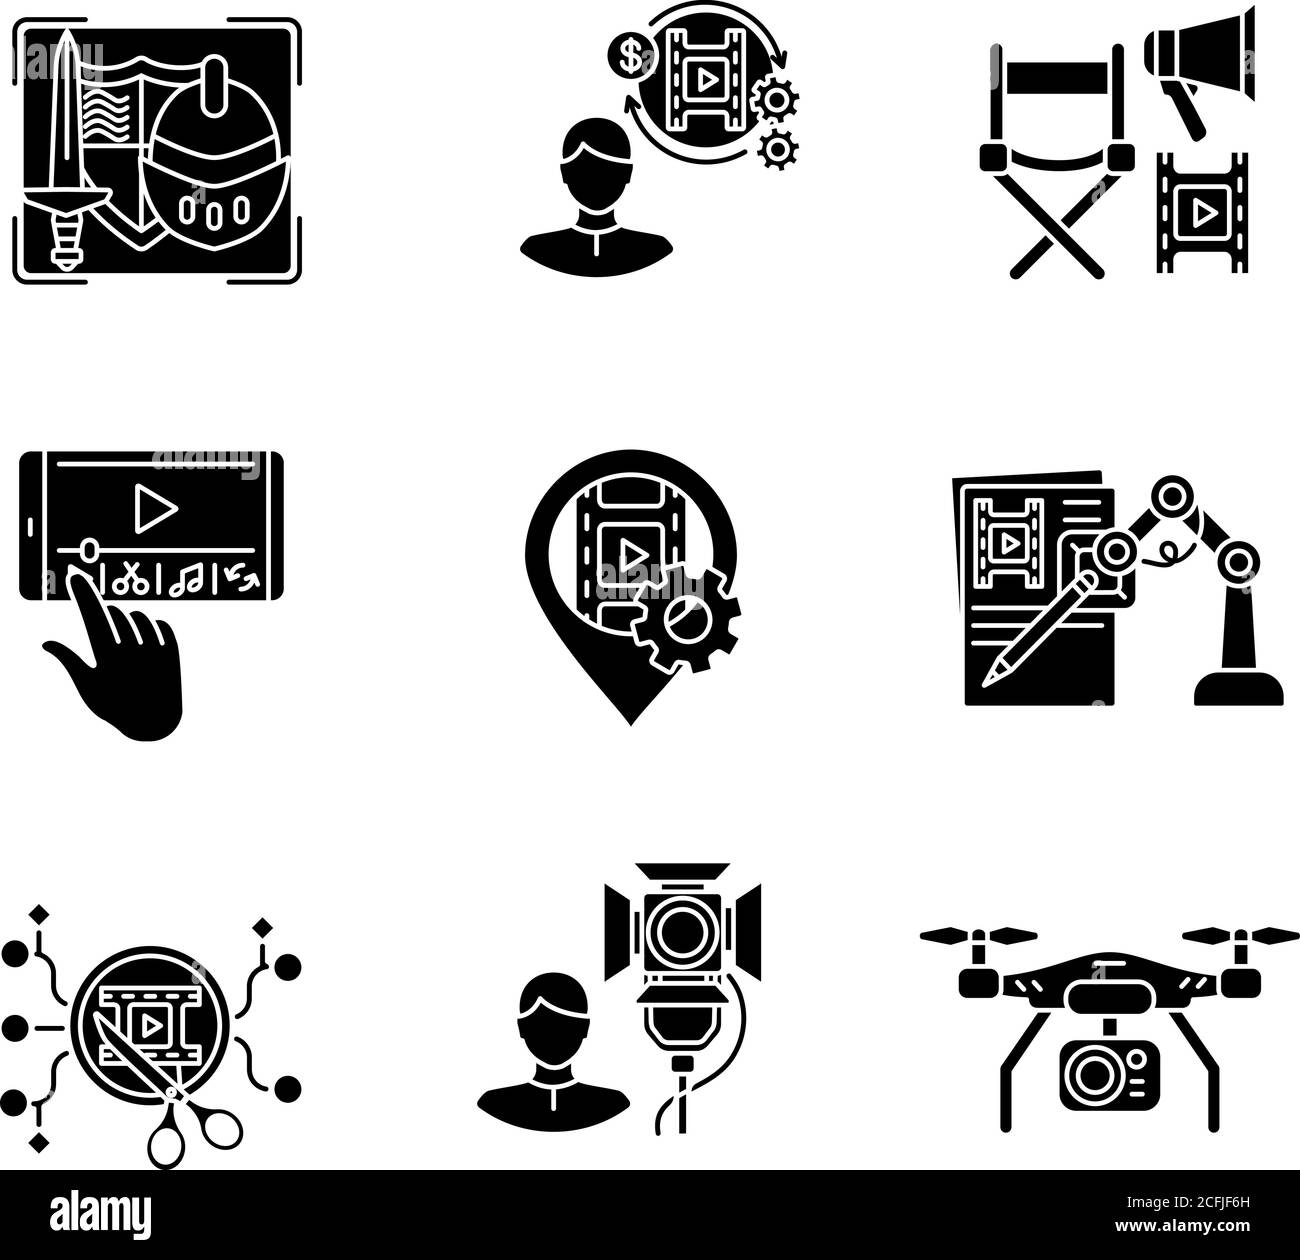 Film making process black glyph icons set on white space Stock Vector